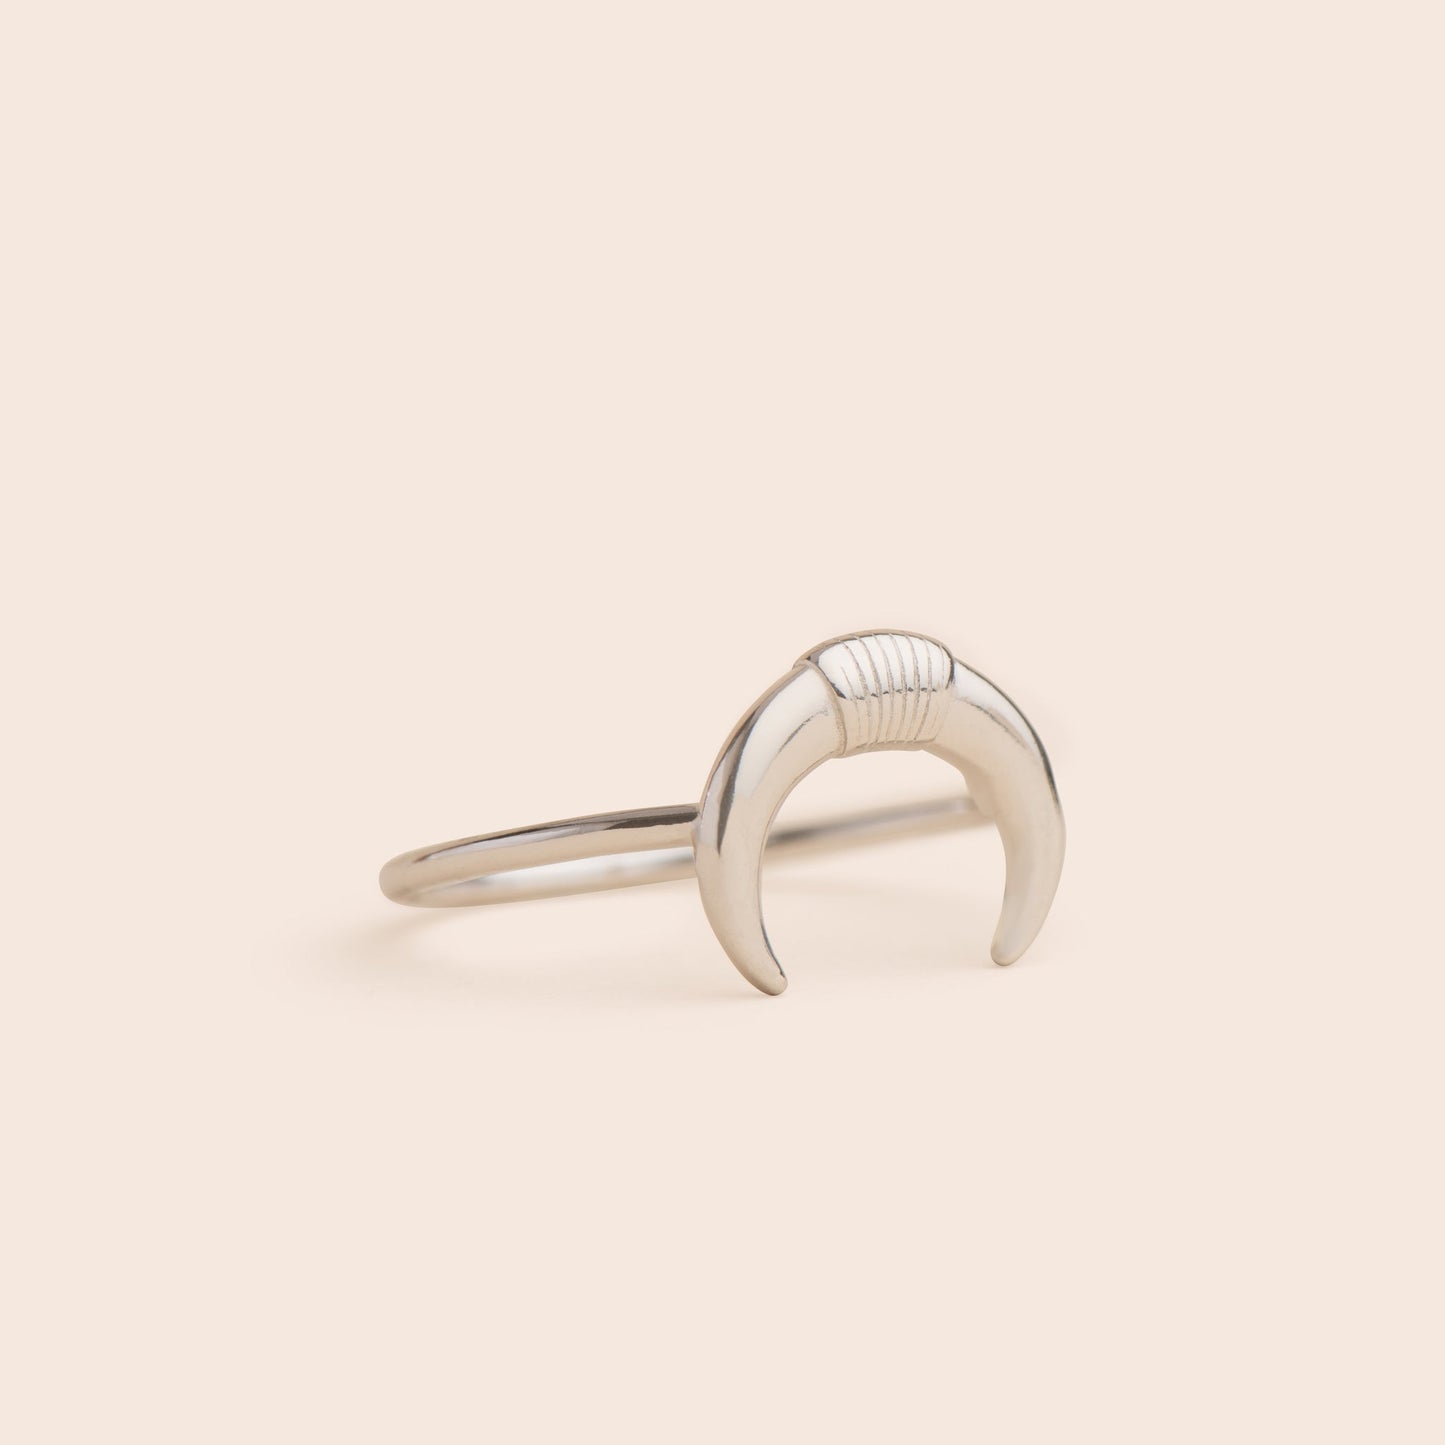 Crescent Moon - Sterling Silver Stacking Ring - Gemlet